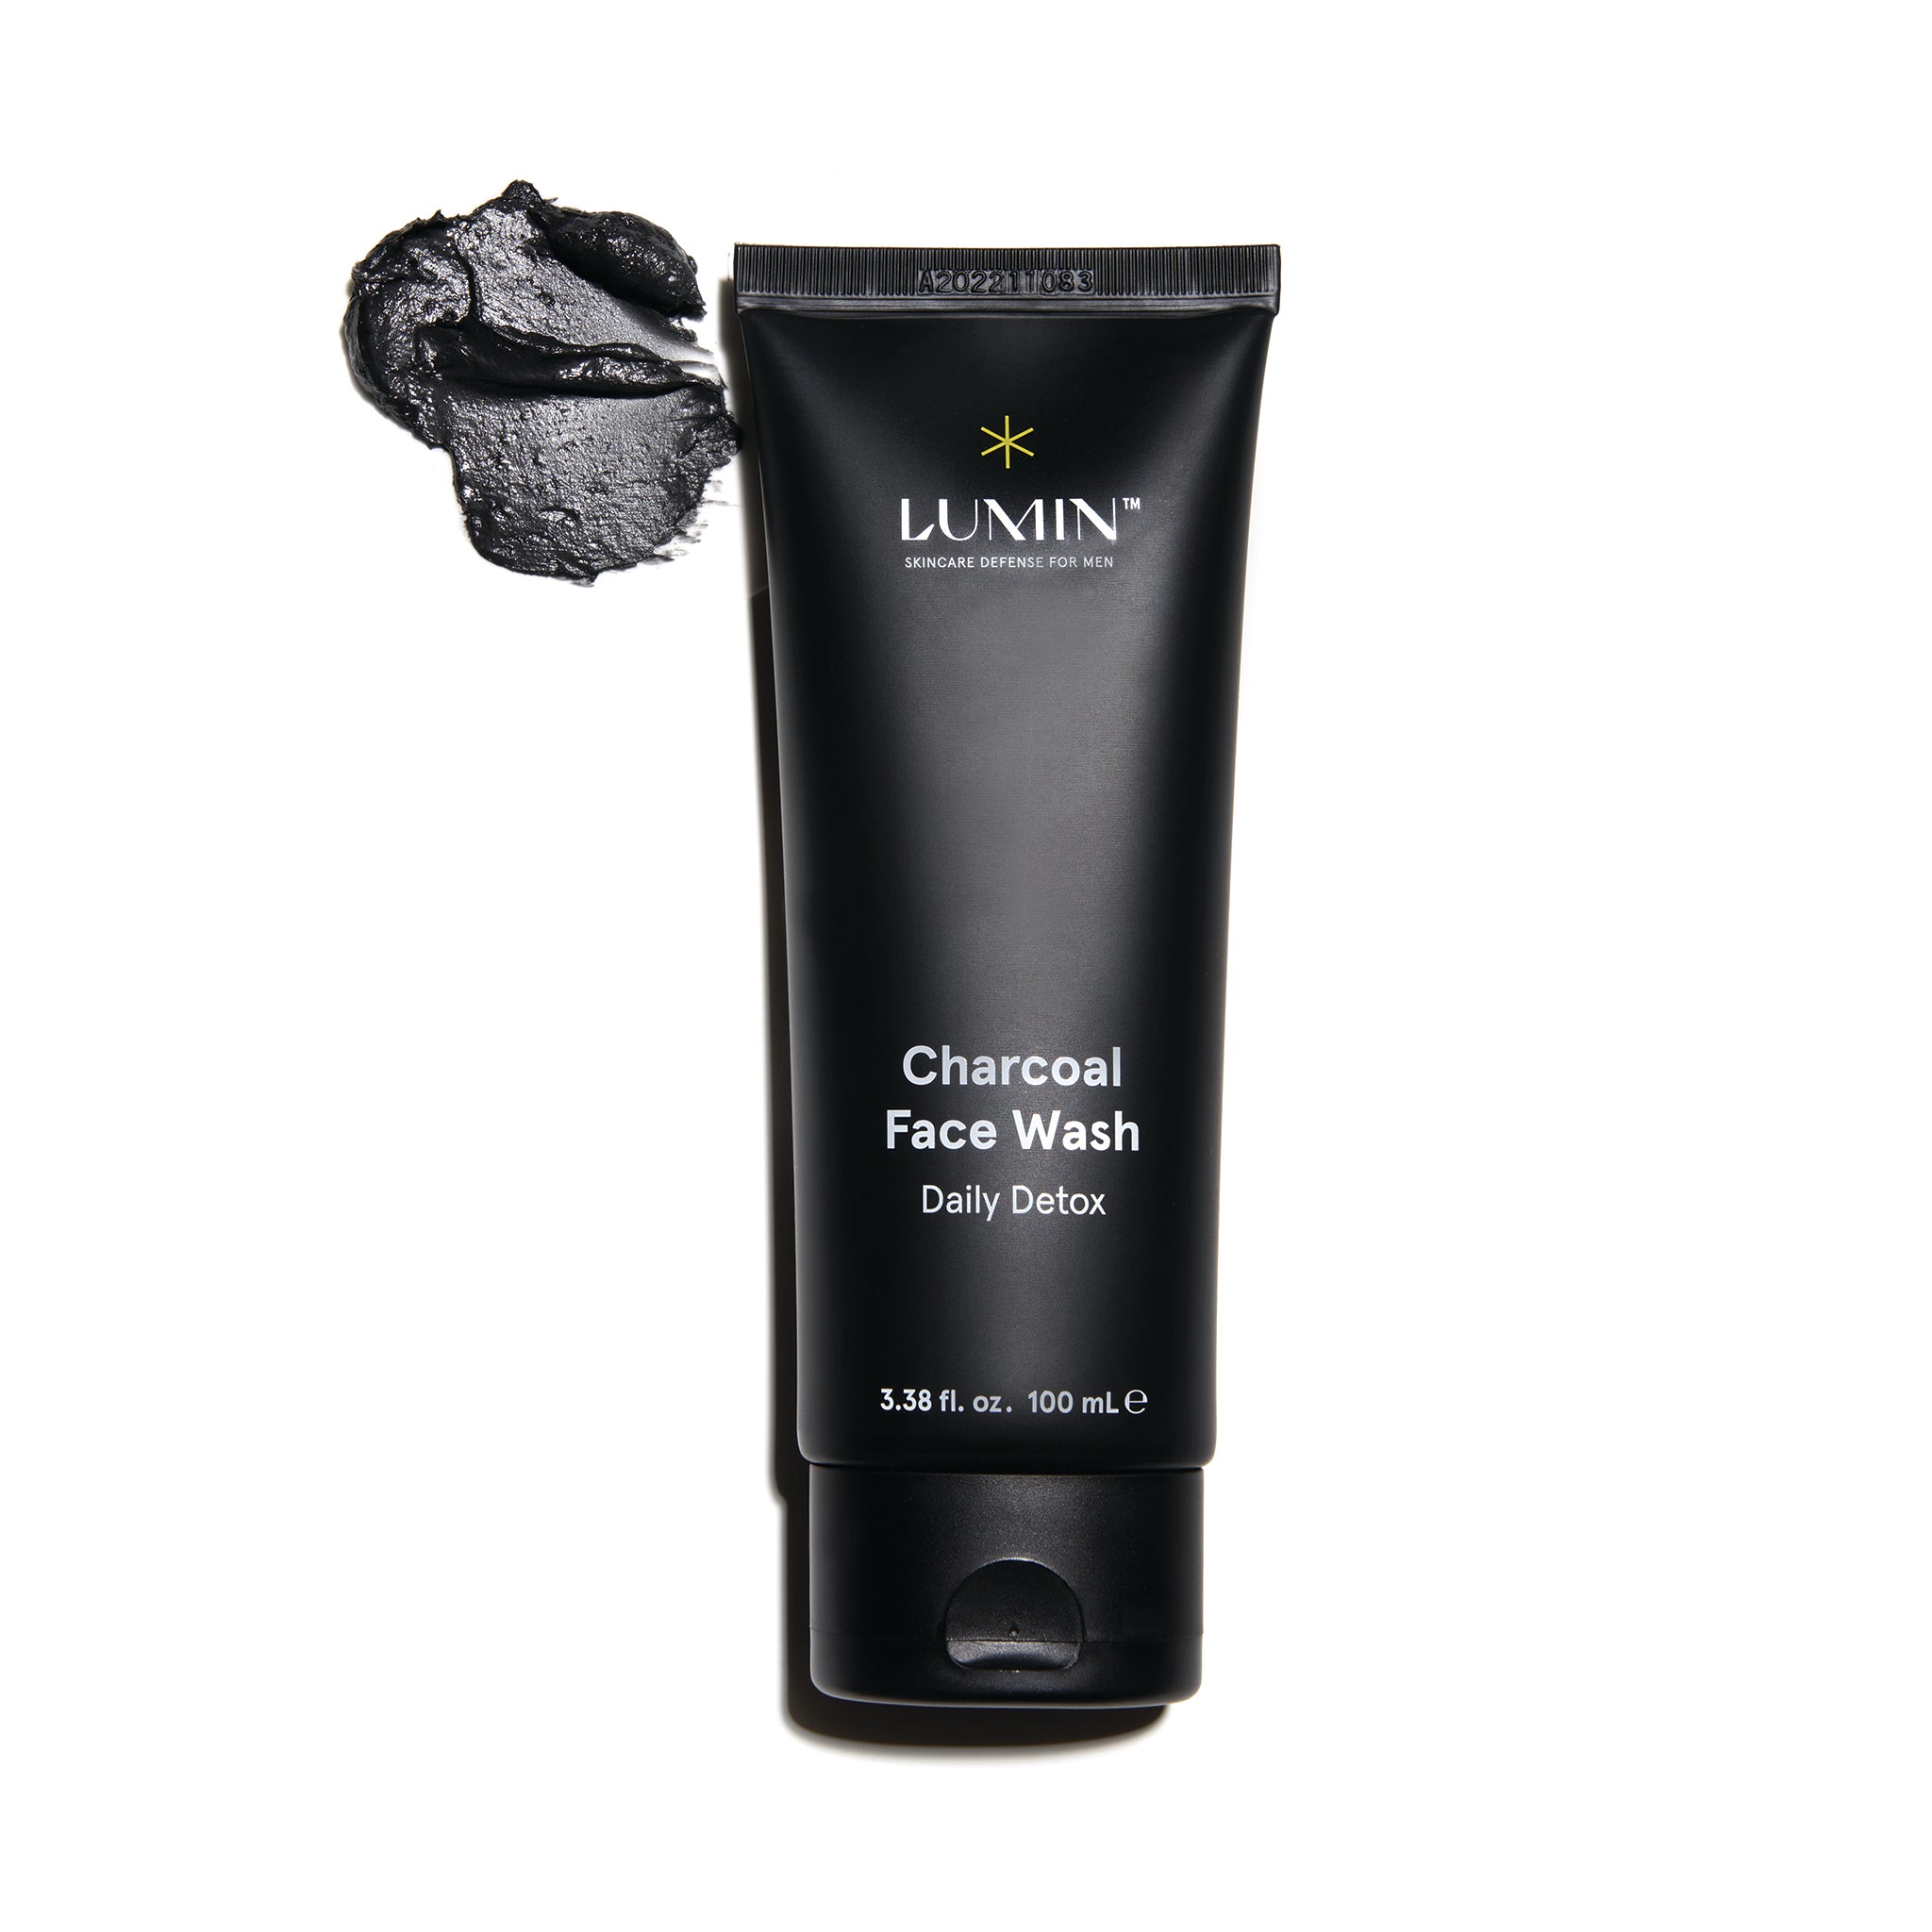 Charcoal Face Wash Daily Detox with cream